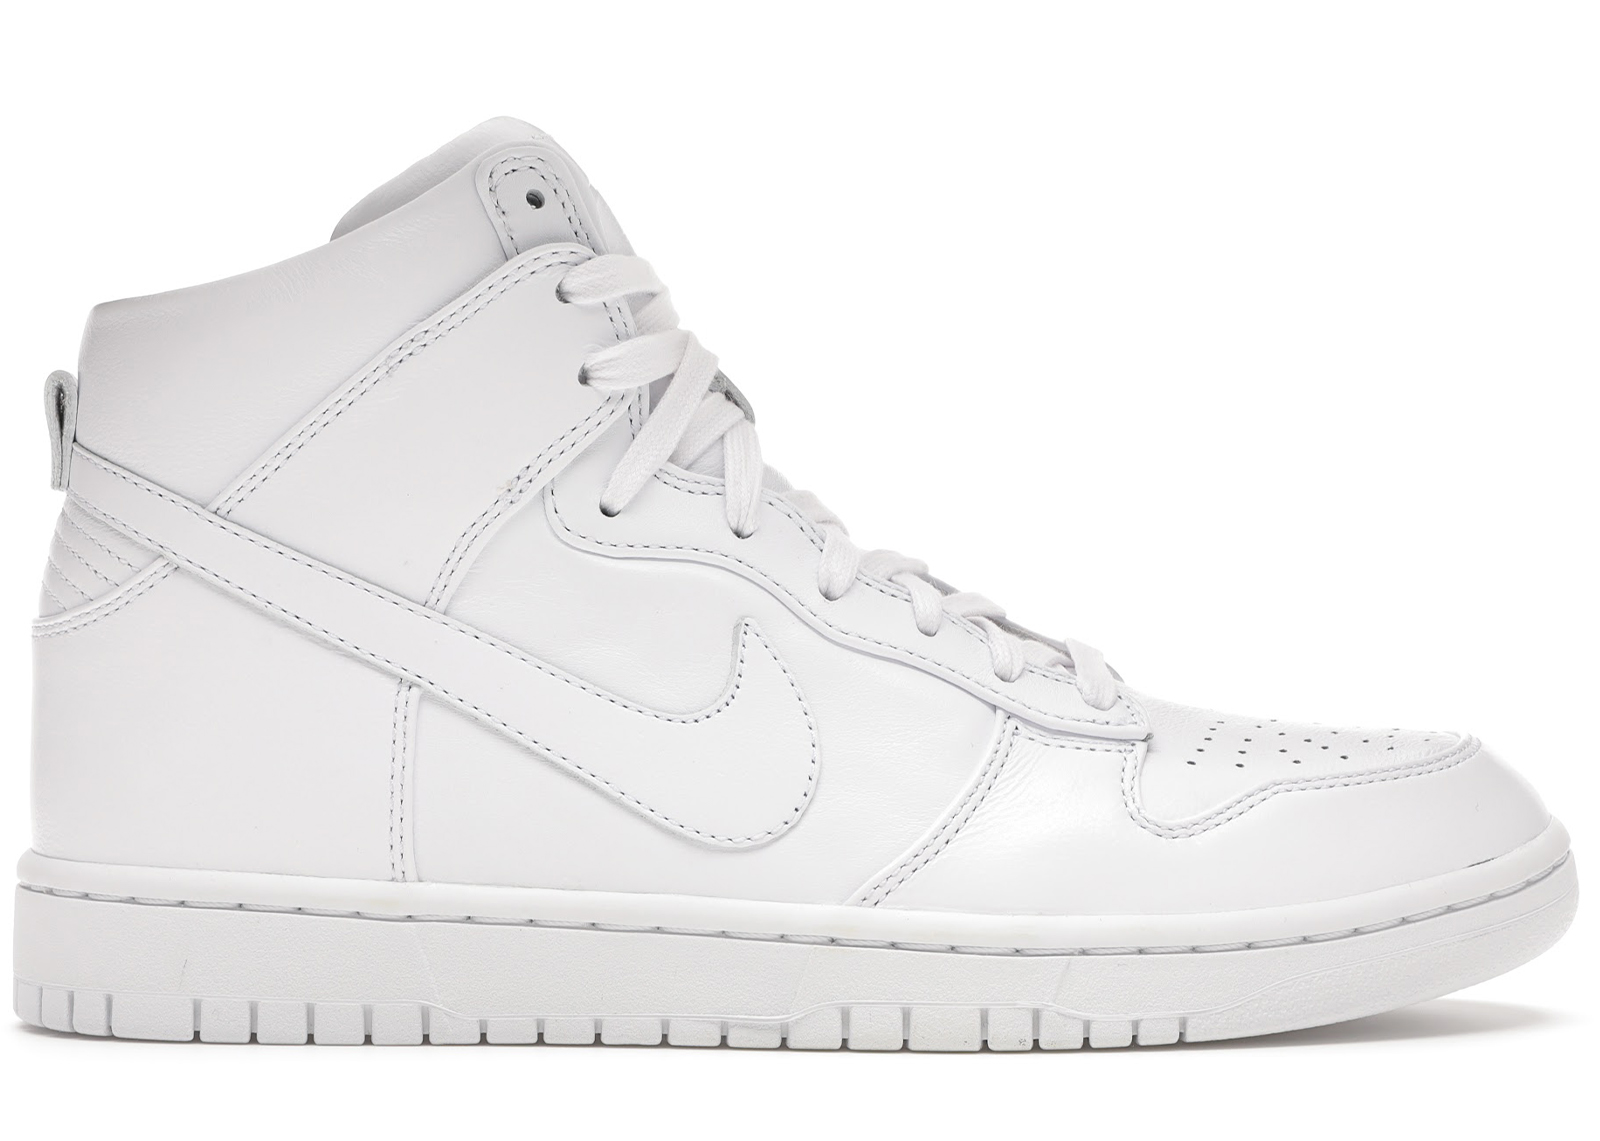 Nike Dunk High Lux White